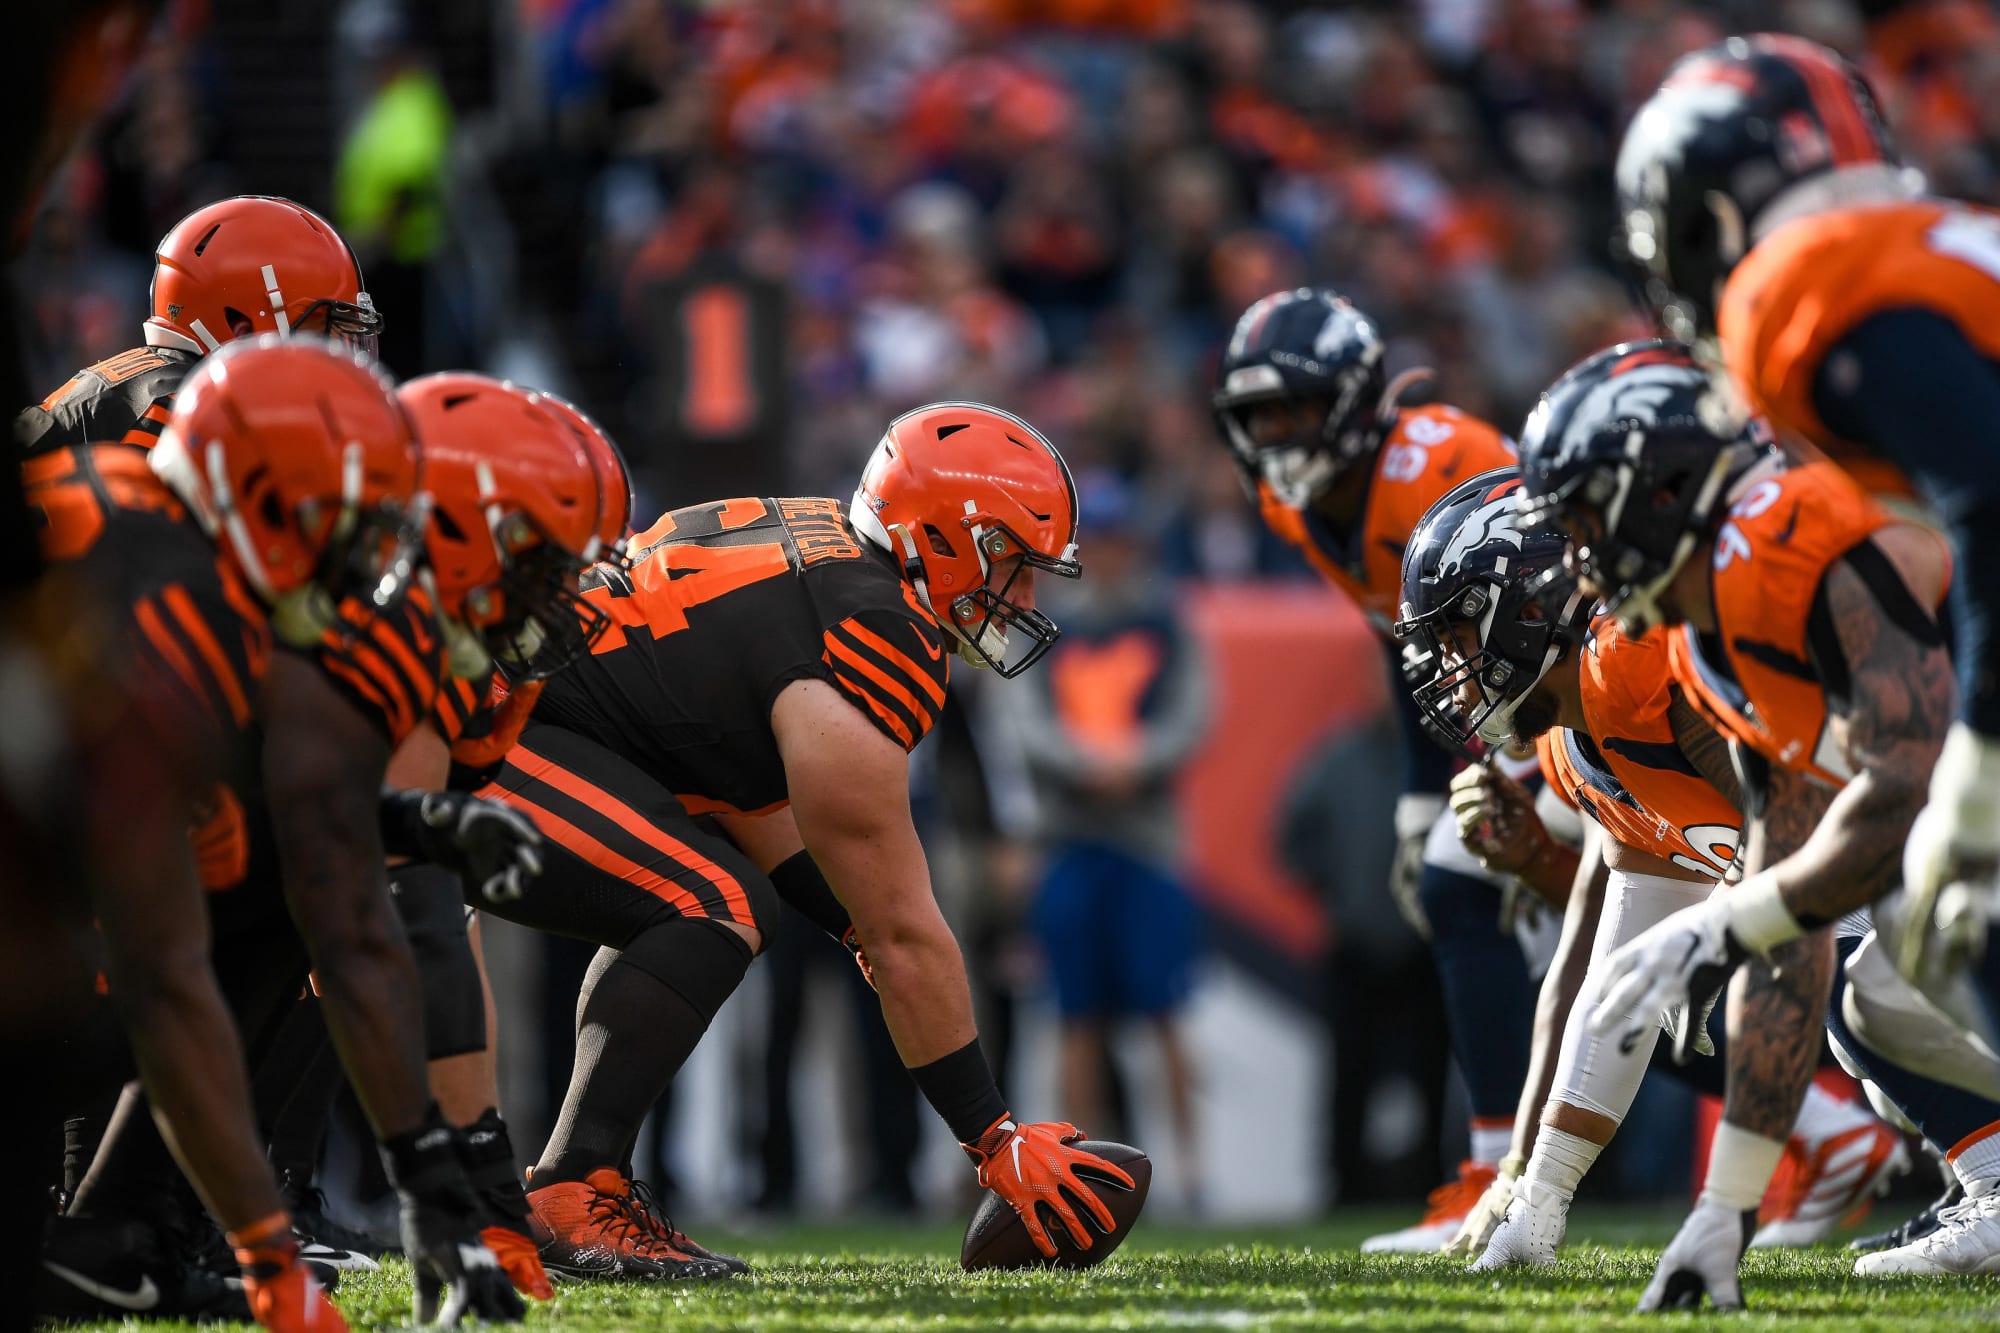 Cleveland Browns roster spots will be tight for offensive linemen